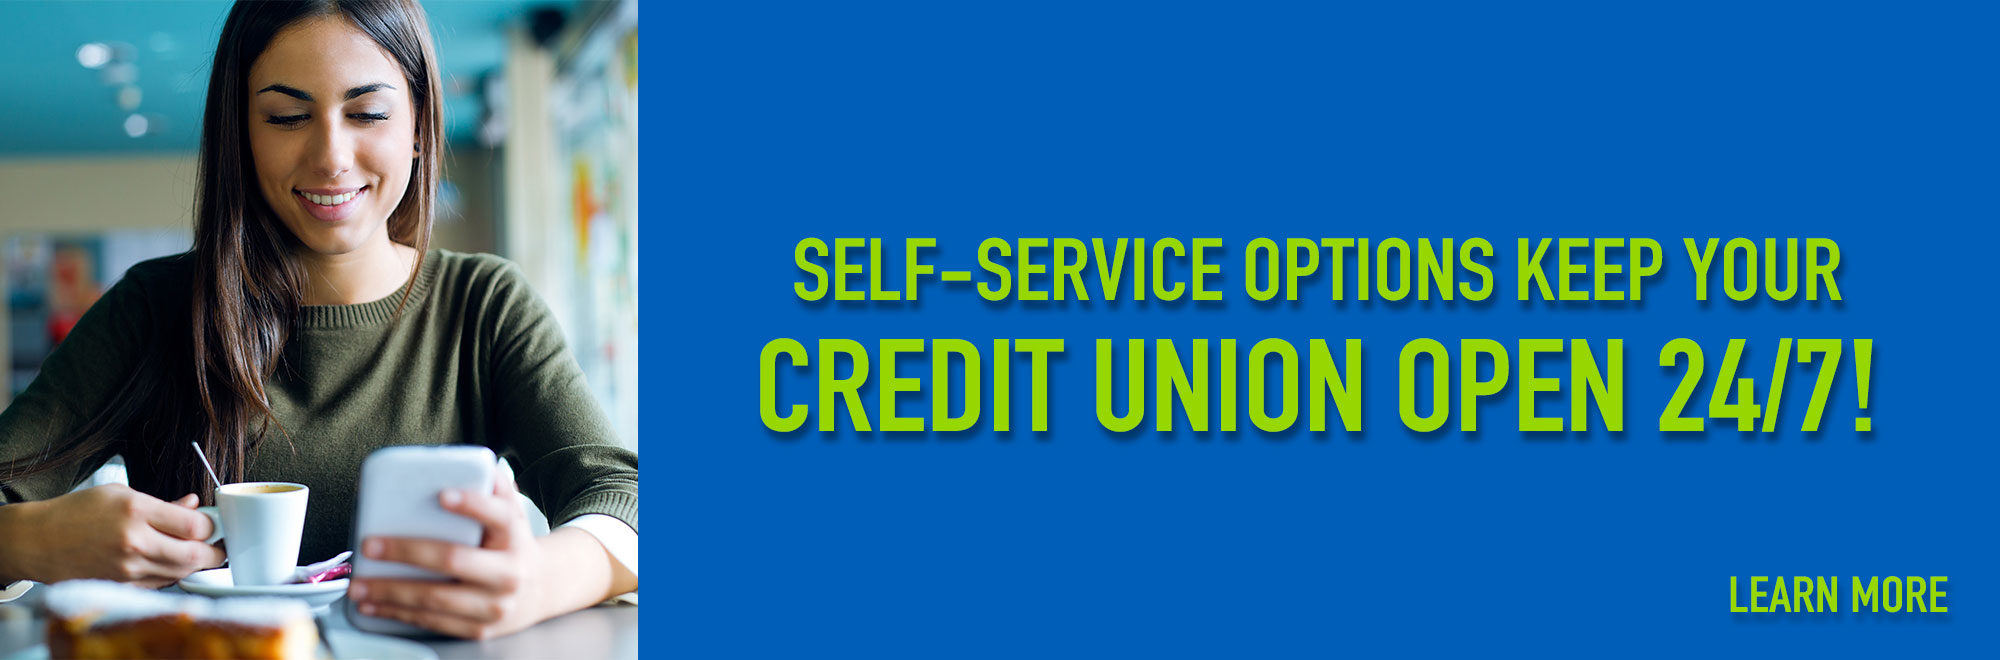 Self service options keep your credit union open 24/7